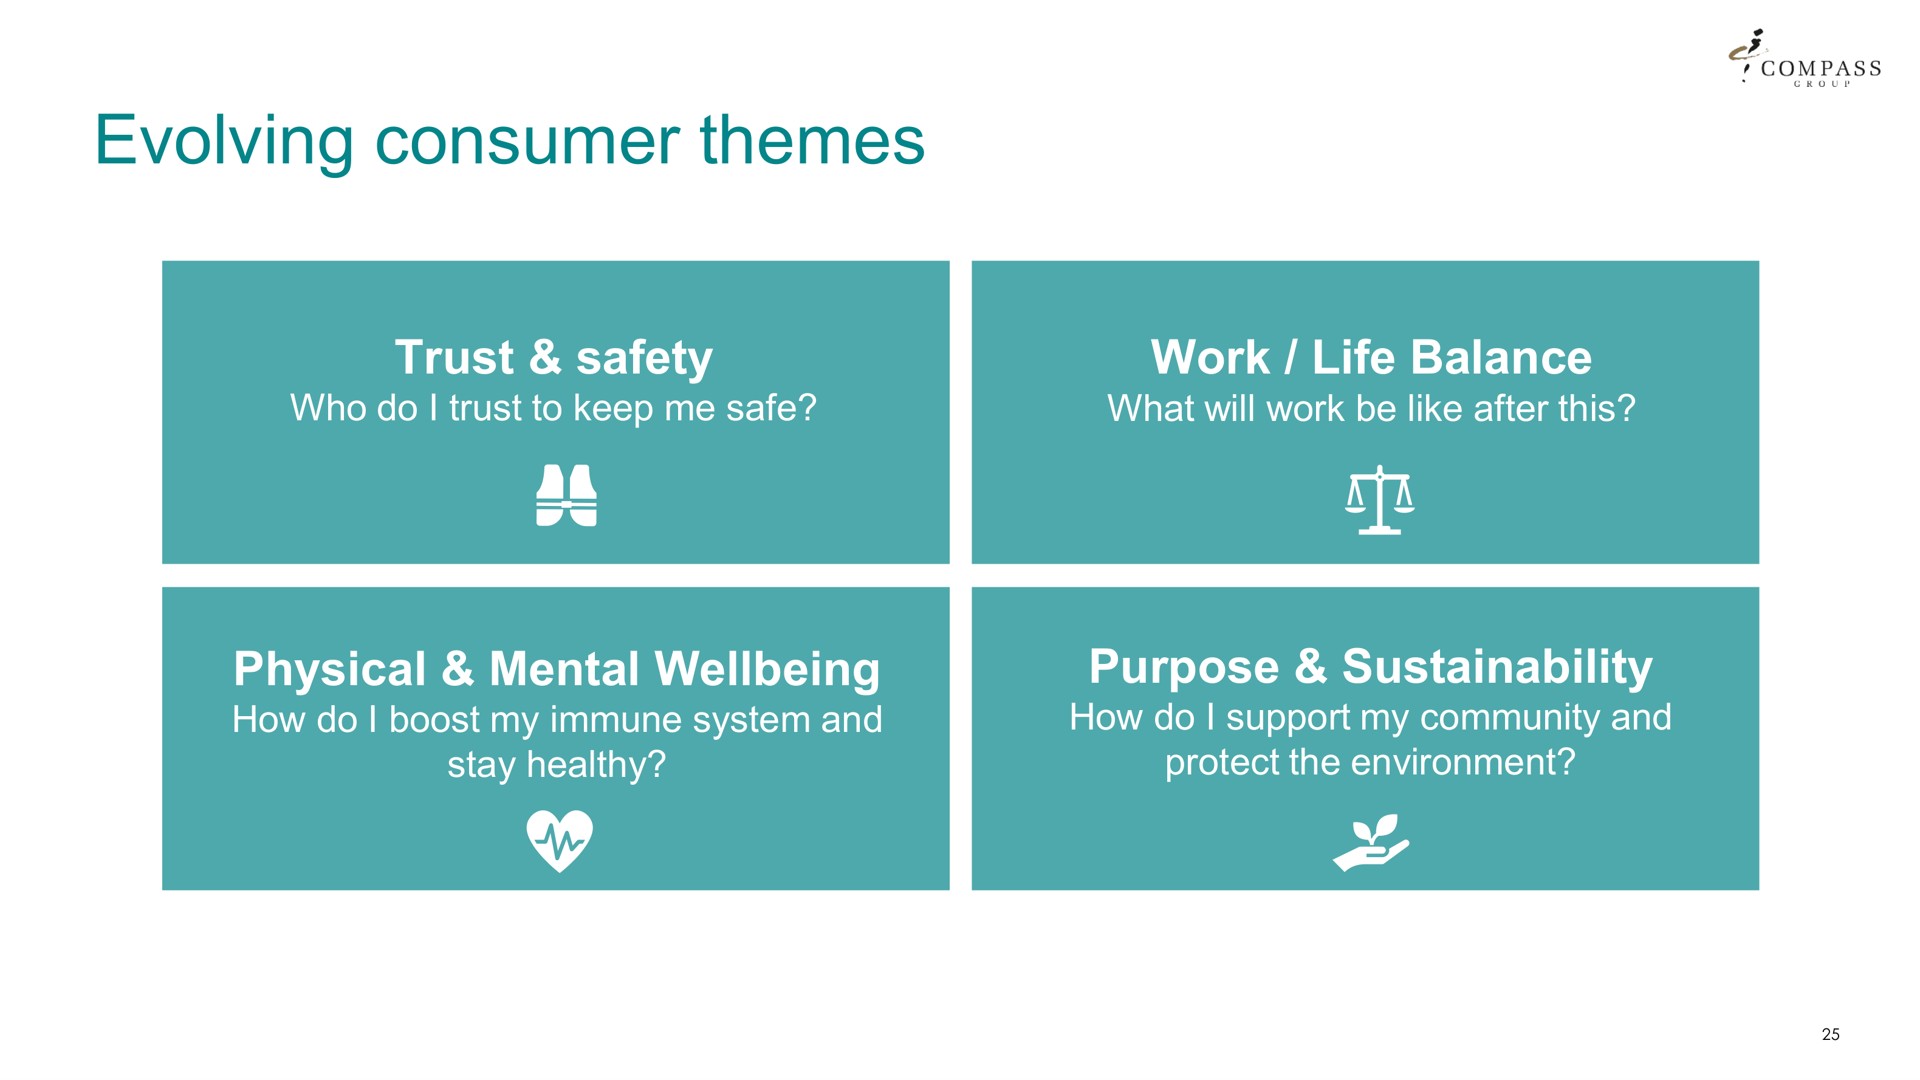 evolving consumer themes | Compass Group